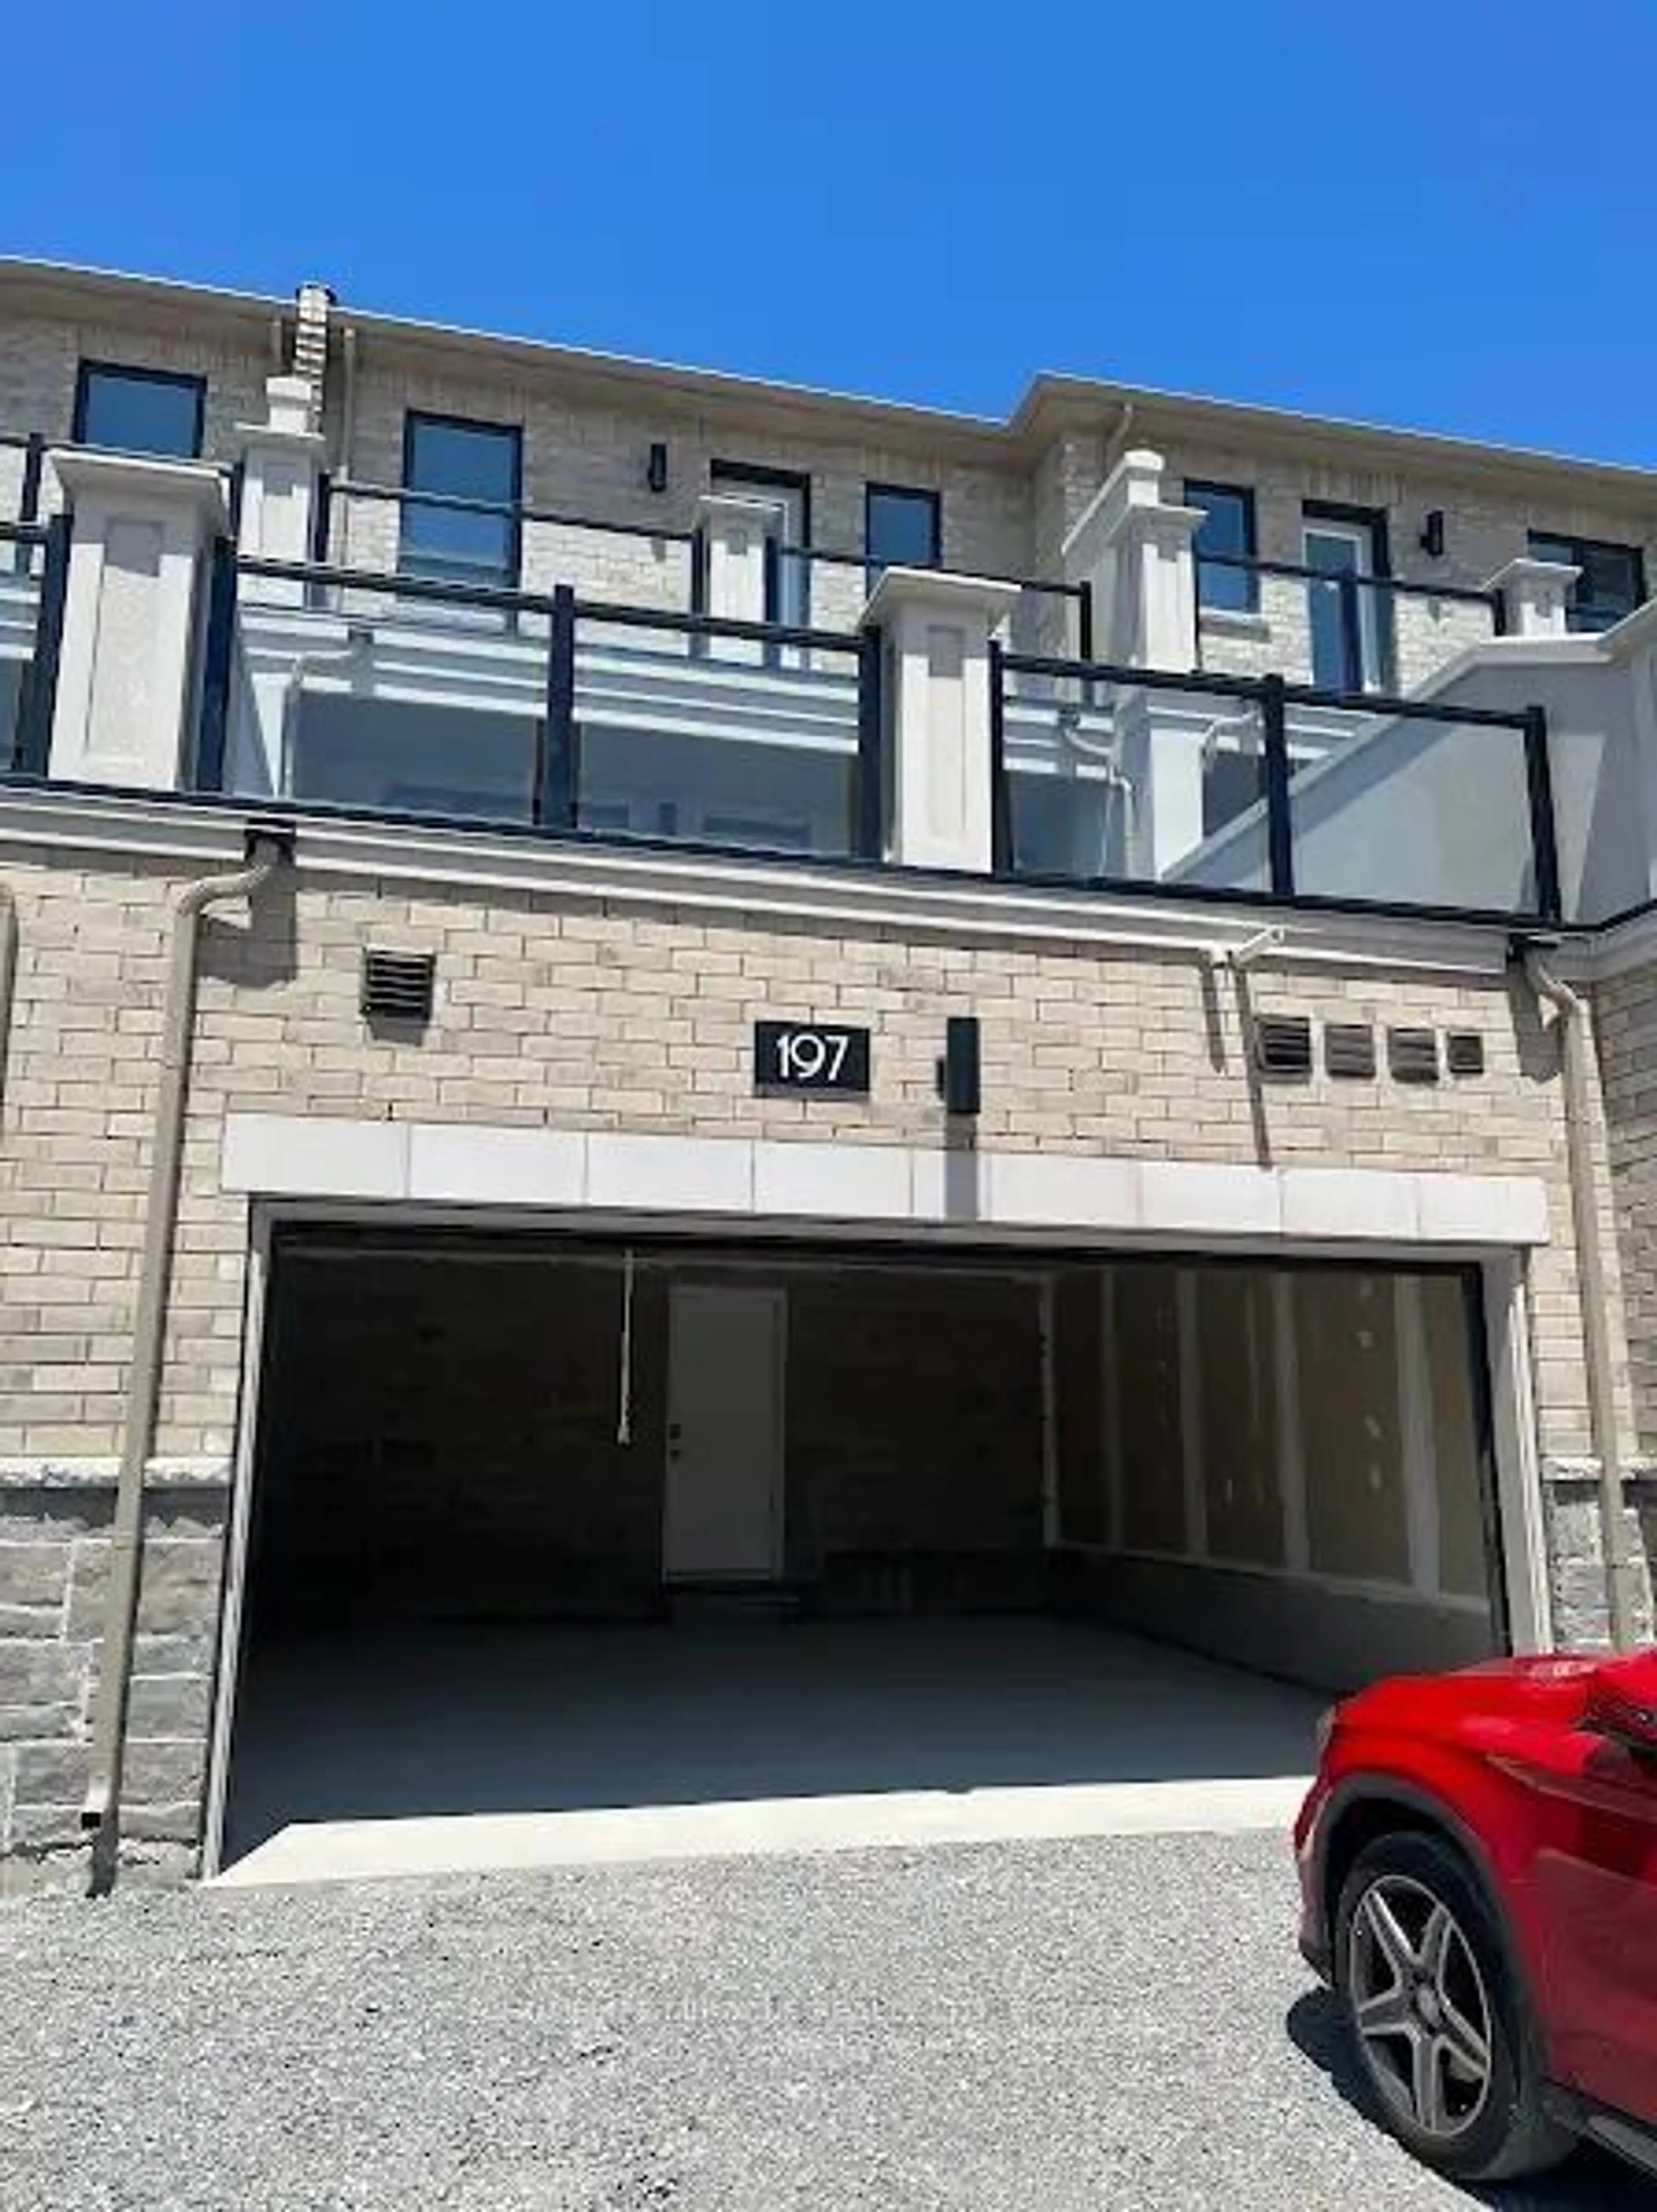 A pic from exterior of the house or condo for 197 Mumbai Dr, Markham Ontario L3S 0G5